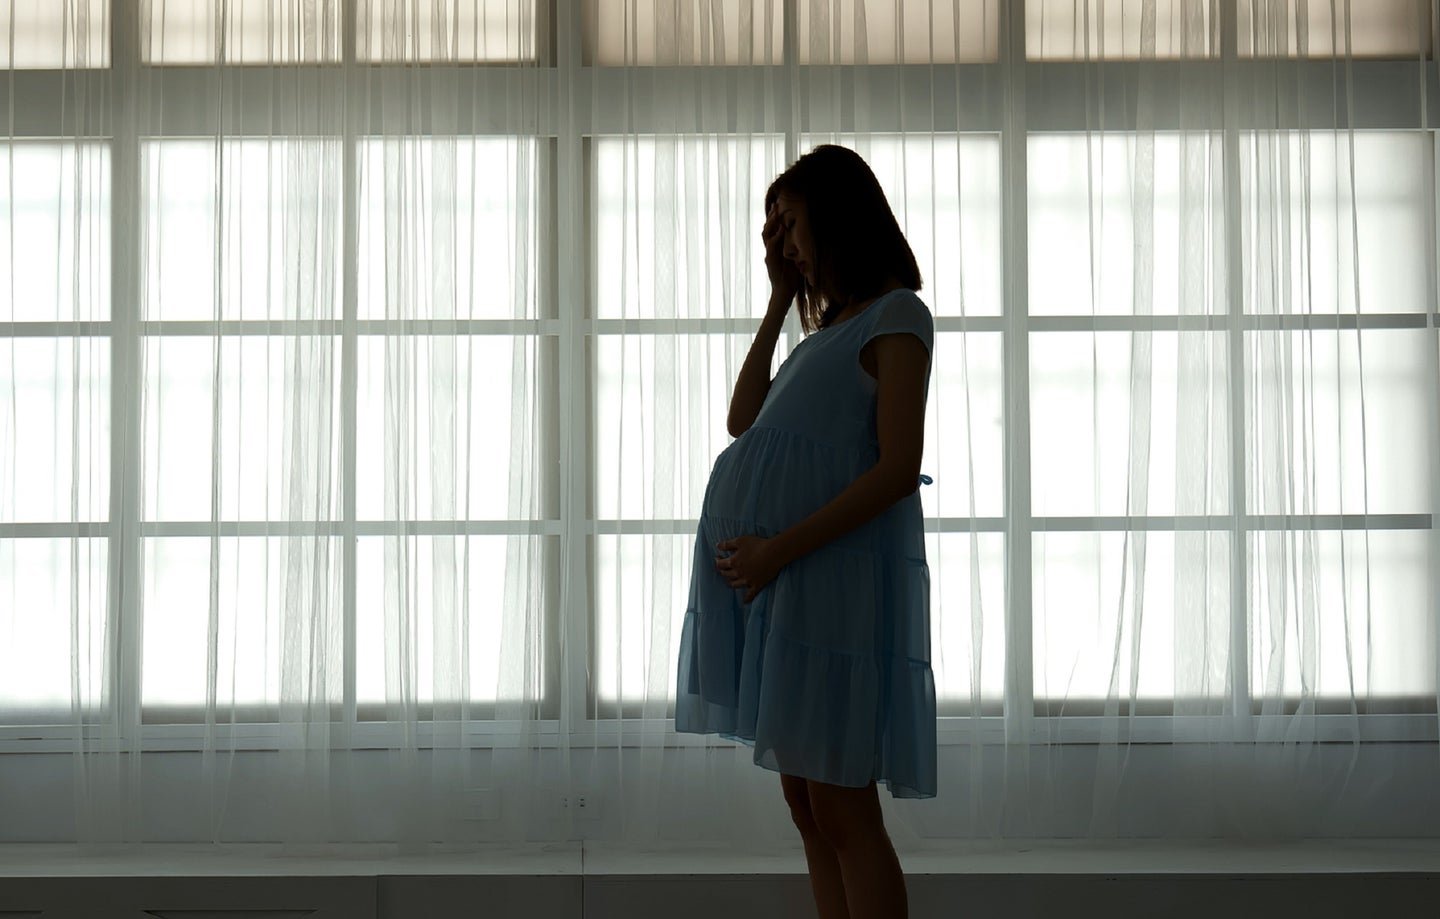 Miscarriages could become more dangerous in a post-Roe world